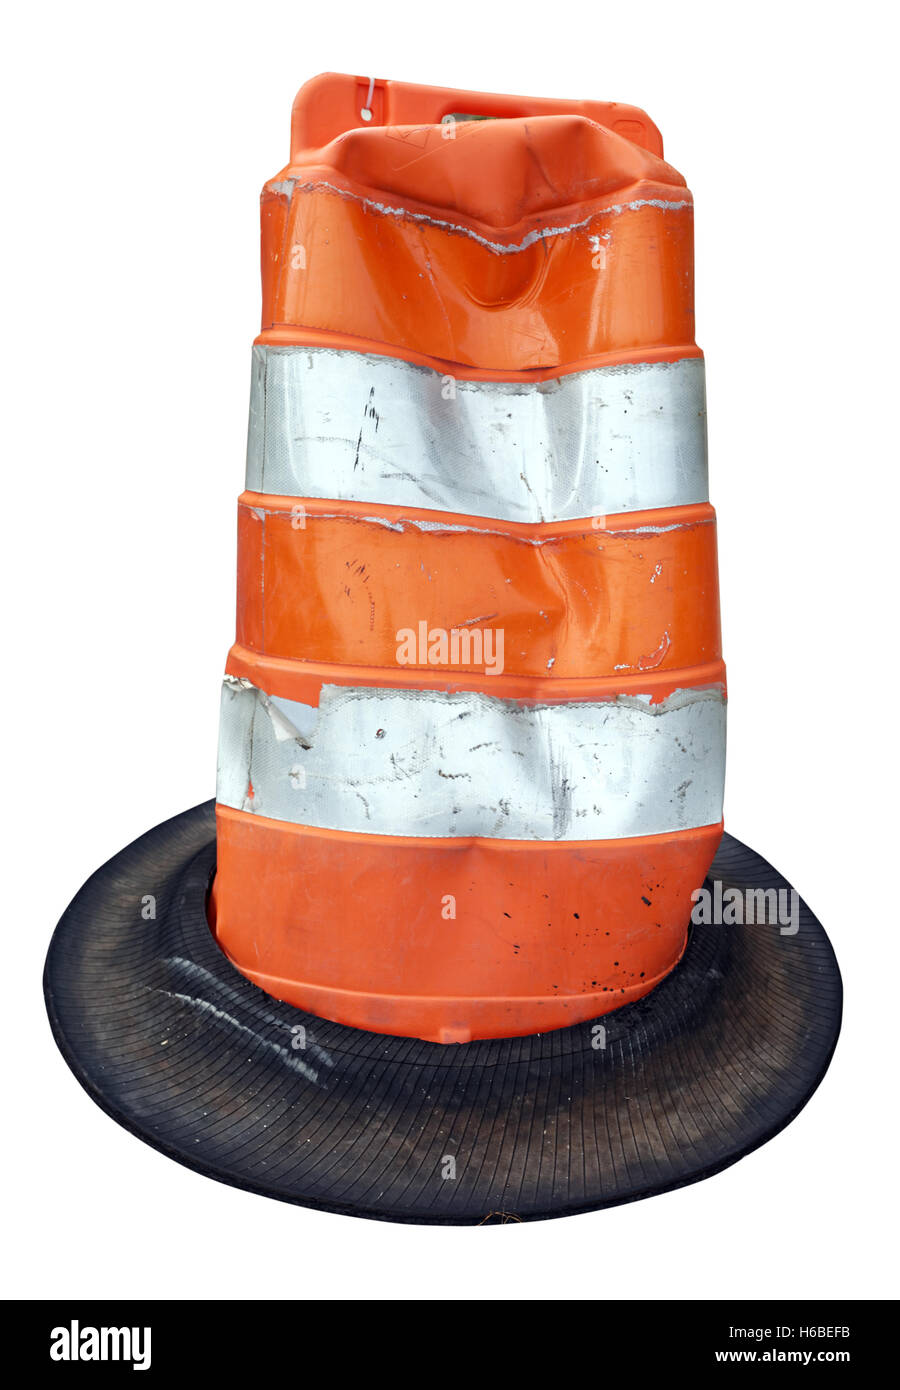 Battered orange and white striped traffic construction cone resembling a Cat in the Hat hat. Isolated on white. Stock Photo